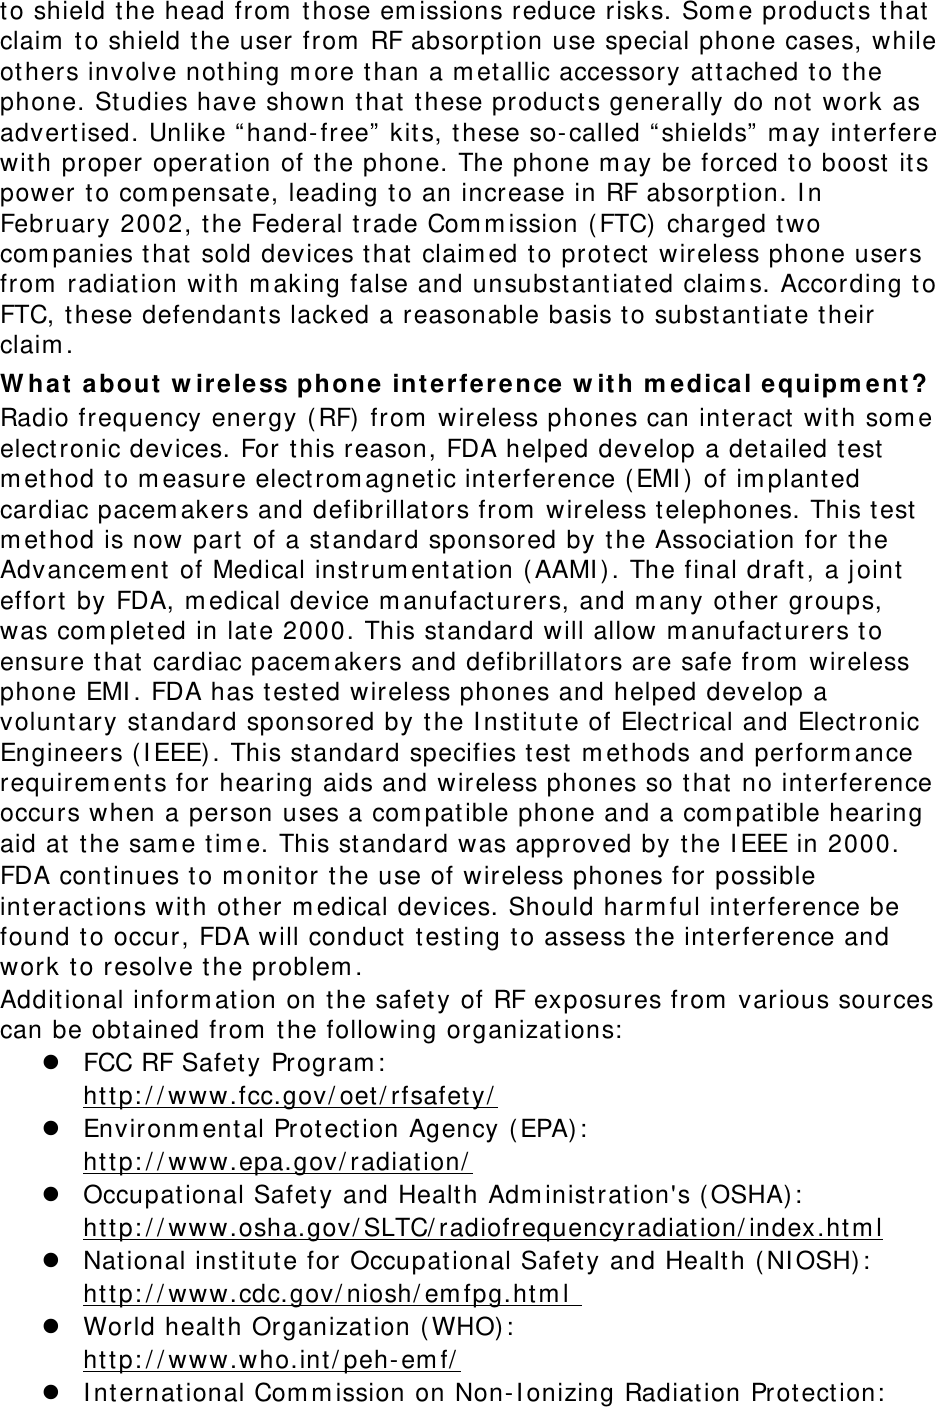 to shield the head from  those em issions reduce risks. Som e product s t hat  claim  t o shield t he user from  RF absorpt ion use special phone cases, while others involve not hing m ore t han a m et allic accessory att ached to the phone. St udies have shown t hat  t hese product s generally do not  work as advertised. Unlike “ hand- free”  kits, t hese so- called “ shields”  m ay interfere with proper operat ion of t he phone. The phone m ay be forced to boost it s power t o com pensat e, leading to an increase in RF absorpt ion. I n February 2002, the Federal t rade Com m ission (FTC) charged t wo com panies t hat  sold devices t hat  claim ed to prot ect  wireless phone users from  radiation wit h m aking false and unsubstant iat ed claim s. According t o FTC, these defendants lacked a reasonable basis t o subst ant iat e t heir claim . W hat  a bout w ir e less phone int erfe r e nce  w it h m edical equipm e nt ? Radio frequency energy ( RF) from  wireless phones can interact  wit h som e elect ronic devices. For this reason, FDA helped develop a det ailed test m et hod to m easure elect rom agnet ic int erference ( EMI ) of im plant ed cardiac pacem akers and defibrillators from  wireless telephones. This test  m et hod is now part  of a st andard sponsored by t he Associat ion for t he Advancem ent of Medical inst rum ent ation ( AAMI ) . The final draft , a j oint  effort  by FDA, m edical device m anufacturers, and m any ot her groups, was com plet ed in late 2000. This standard will allow m anufact urers t o ensure t hat  cardiac pacem akers and defibrillat ors are safe from  wireless phone EMI . FDA has t est ed wireless phones and helped develop a voluntary standard sponsored by t he I nst itut e of Elect rical and Electronic Engineers ( I EEE). This st andard specifies t est m et hods and perform ance requirem ent s for hearing aids and wireless phones so that no int erference occurs when a person uses a com pat ible phone and a com pat ible hearing aid at  the sam e t im e. This st andard was approved by t he I EEE in 2000. FDA cont inues t o m onitor the use of wireless phones for possible int eract ions with ot her m edical devices. Should harm ful int erference be found to occur, FDA will conduct  test ing t o assess the int erference and work to resolve t he problem . Additional inform at ion on the safet y of RF exposures from  various sources can be obtained from  the following organizat ions:   FCC RF Safety Program :   htt p: / / www.fcc.gov/ oet / rfsafety/   Environm ent al Prot ect ion Agency ( EPA) :   htt p: / / www.epa.gov/ radiat ion/   Occupat ional Safet y and Healt h Adm inistrat ion&apos;s ( OSHA) :          htt p: / / www.osha.gov/ SLTC/ radiofrequencyradiat ion/ index.ht m l  National inst itut e for Occupat ional Safet y and Health ( NI OSH) :   htt p: / / www.cdc.gov/ niosh/ em fpg.ht m l   World health Organizat ion ( WHO) :   htt p: / / www.who.int / peh- em f/   I nt ernat ional Com m ission on Non-I onizing Radiat ion Protect ion:  